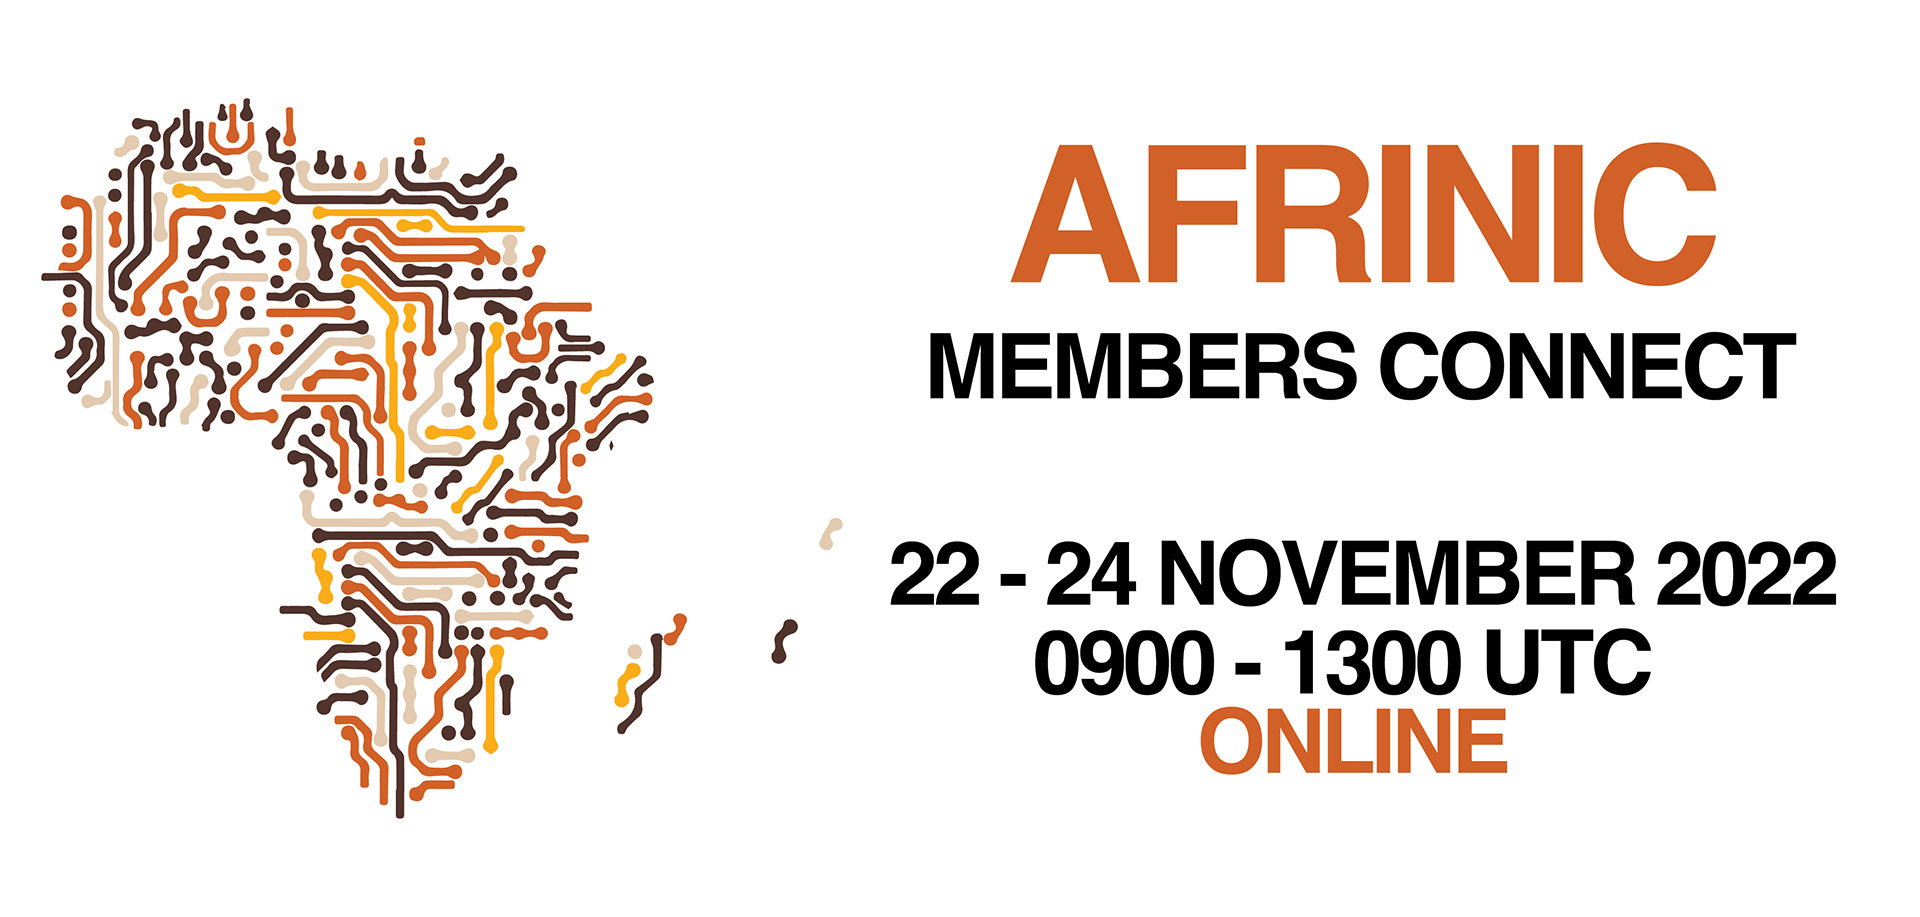 AFRINIC Members Connect